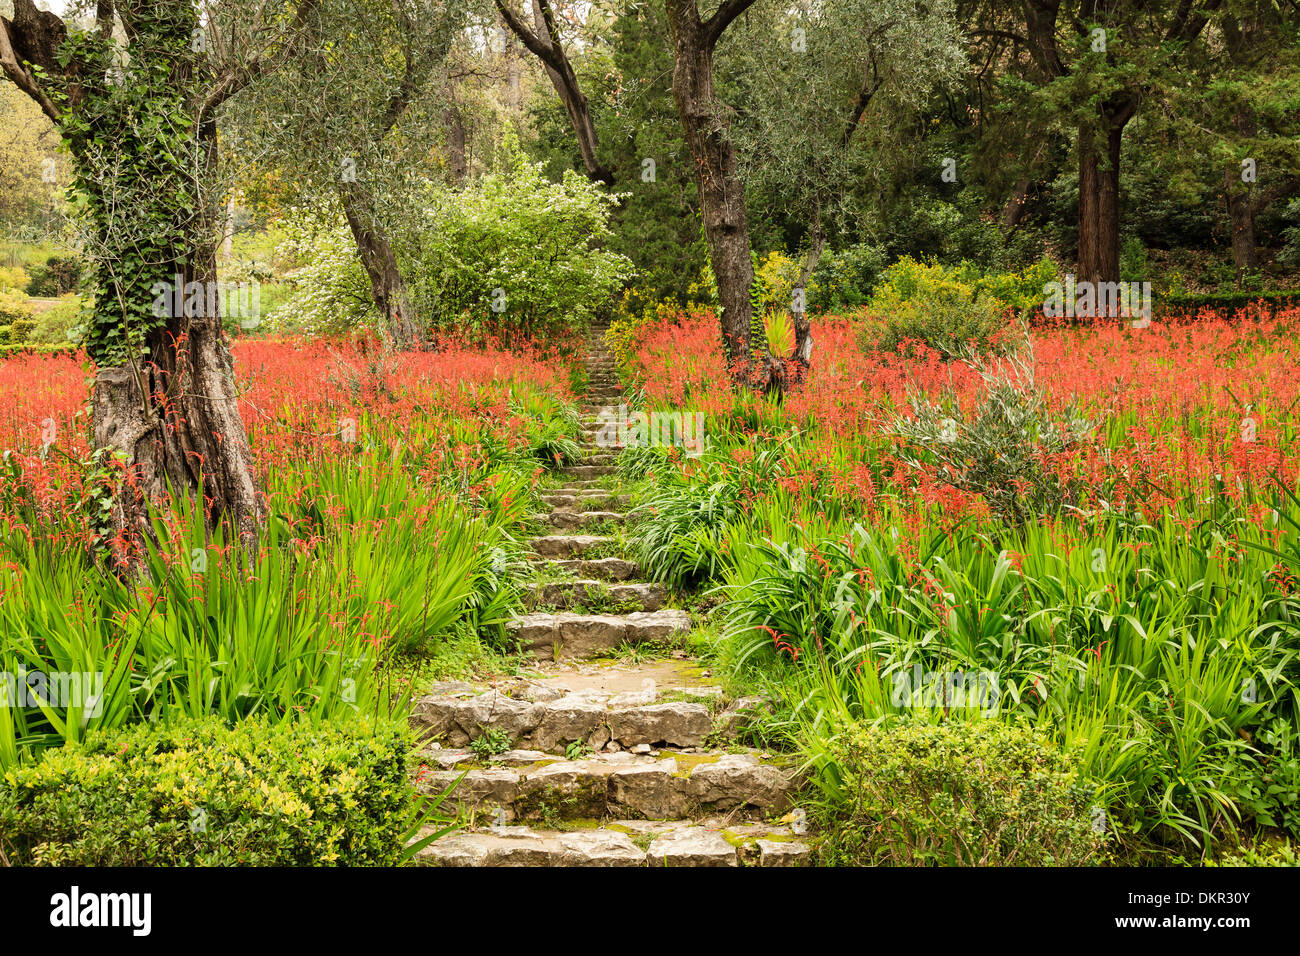 France, Menton, Serre de la Madone garden, olive trees and flowering carpet of chasmanthes (use for press and book only) Stock Photo